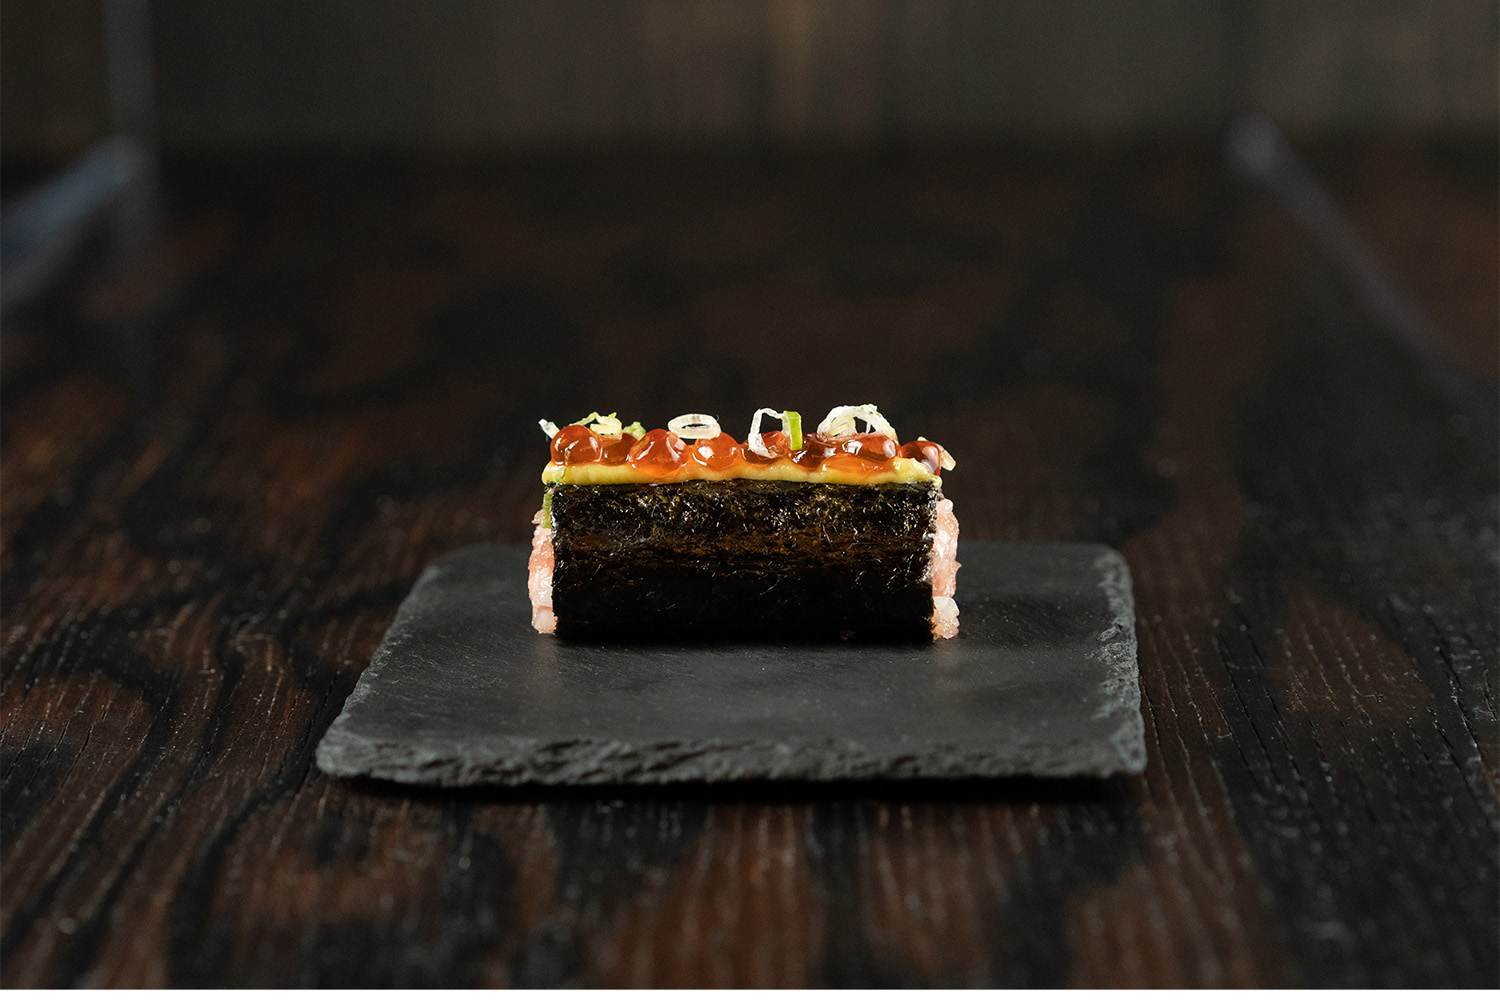 Blue Fin Tuna served inside a cylinder of crispy roll, topped with avocado mousse and house cured salmon caviar